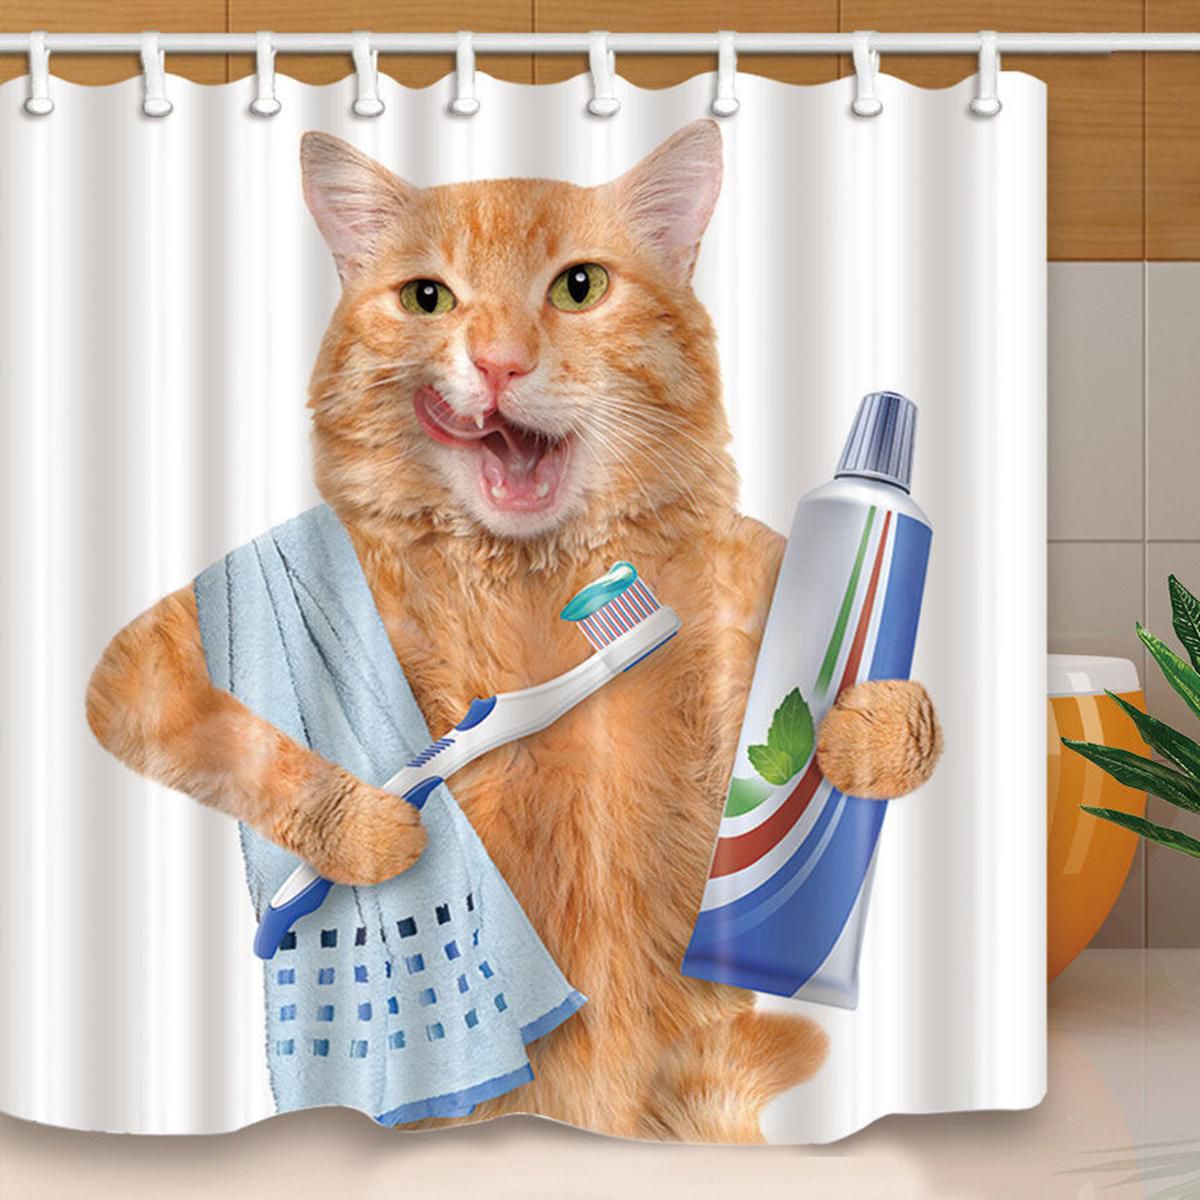 Morning Cat Waterproof Polyester Shower Curtain Home Bathroom Decor with Hooks 